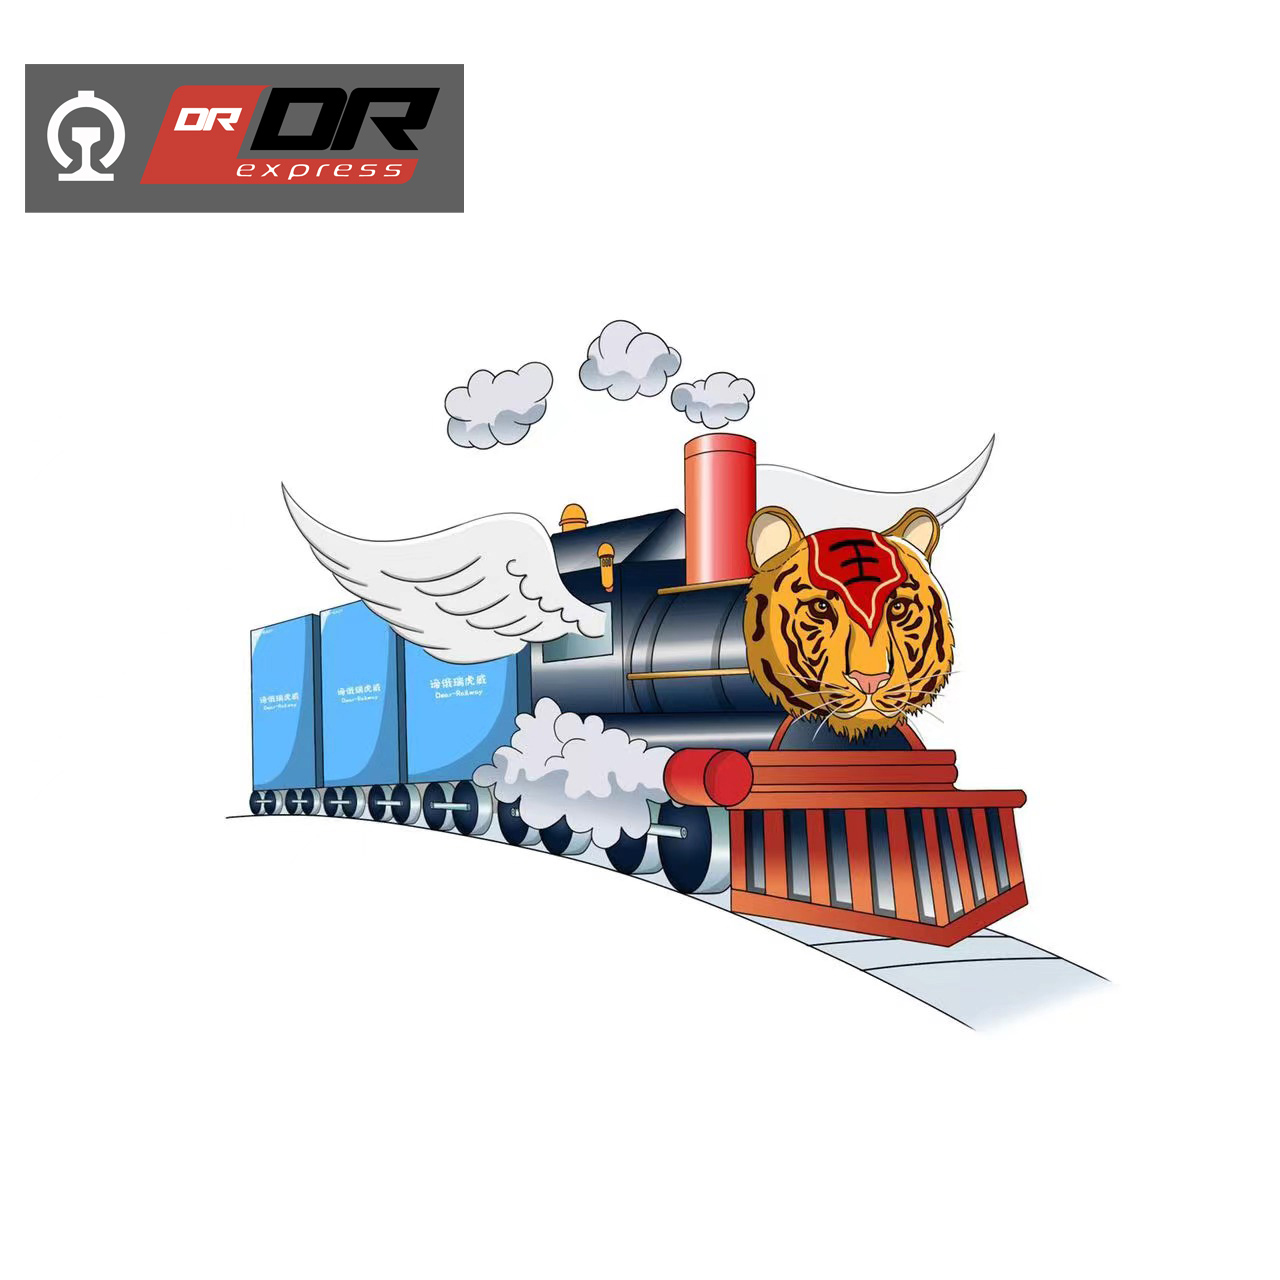 Machine from China  to Russia by Railway